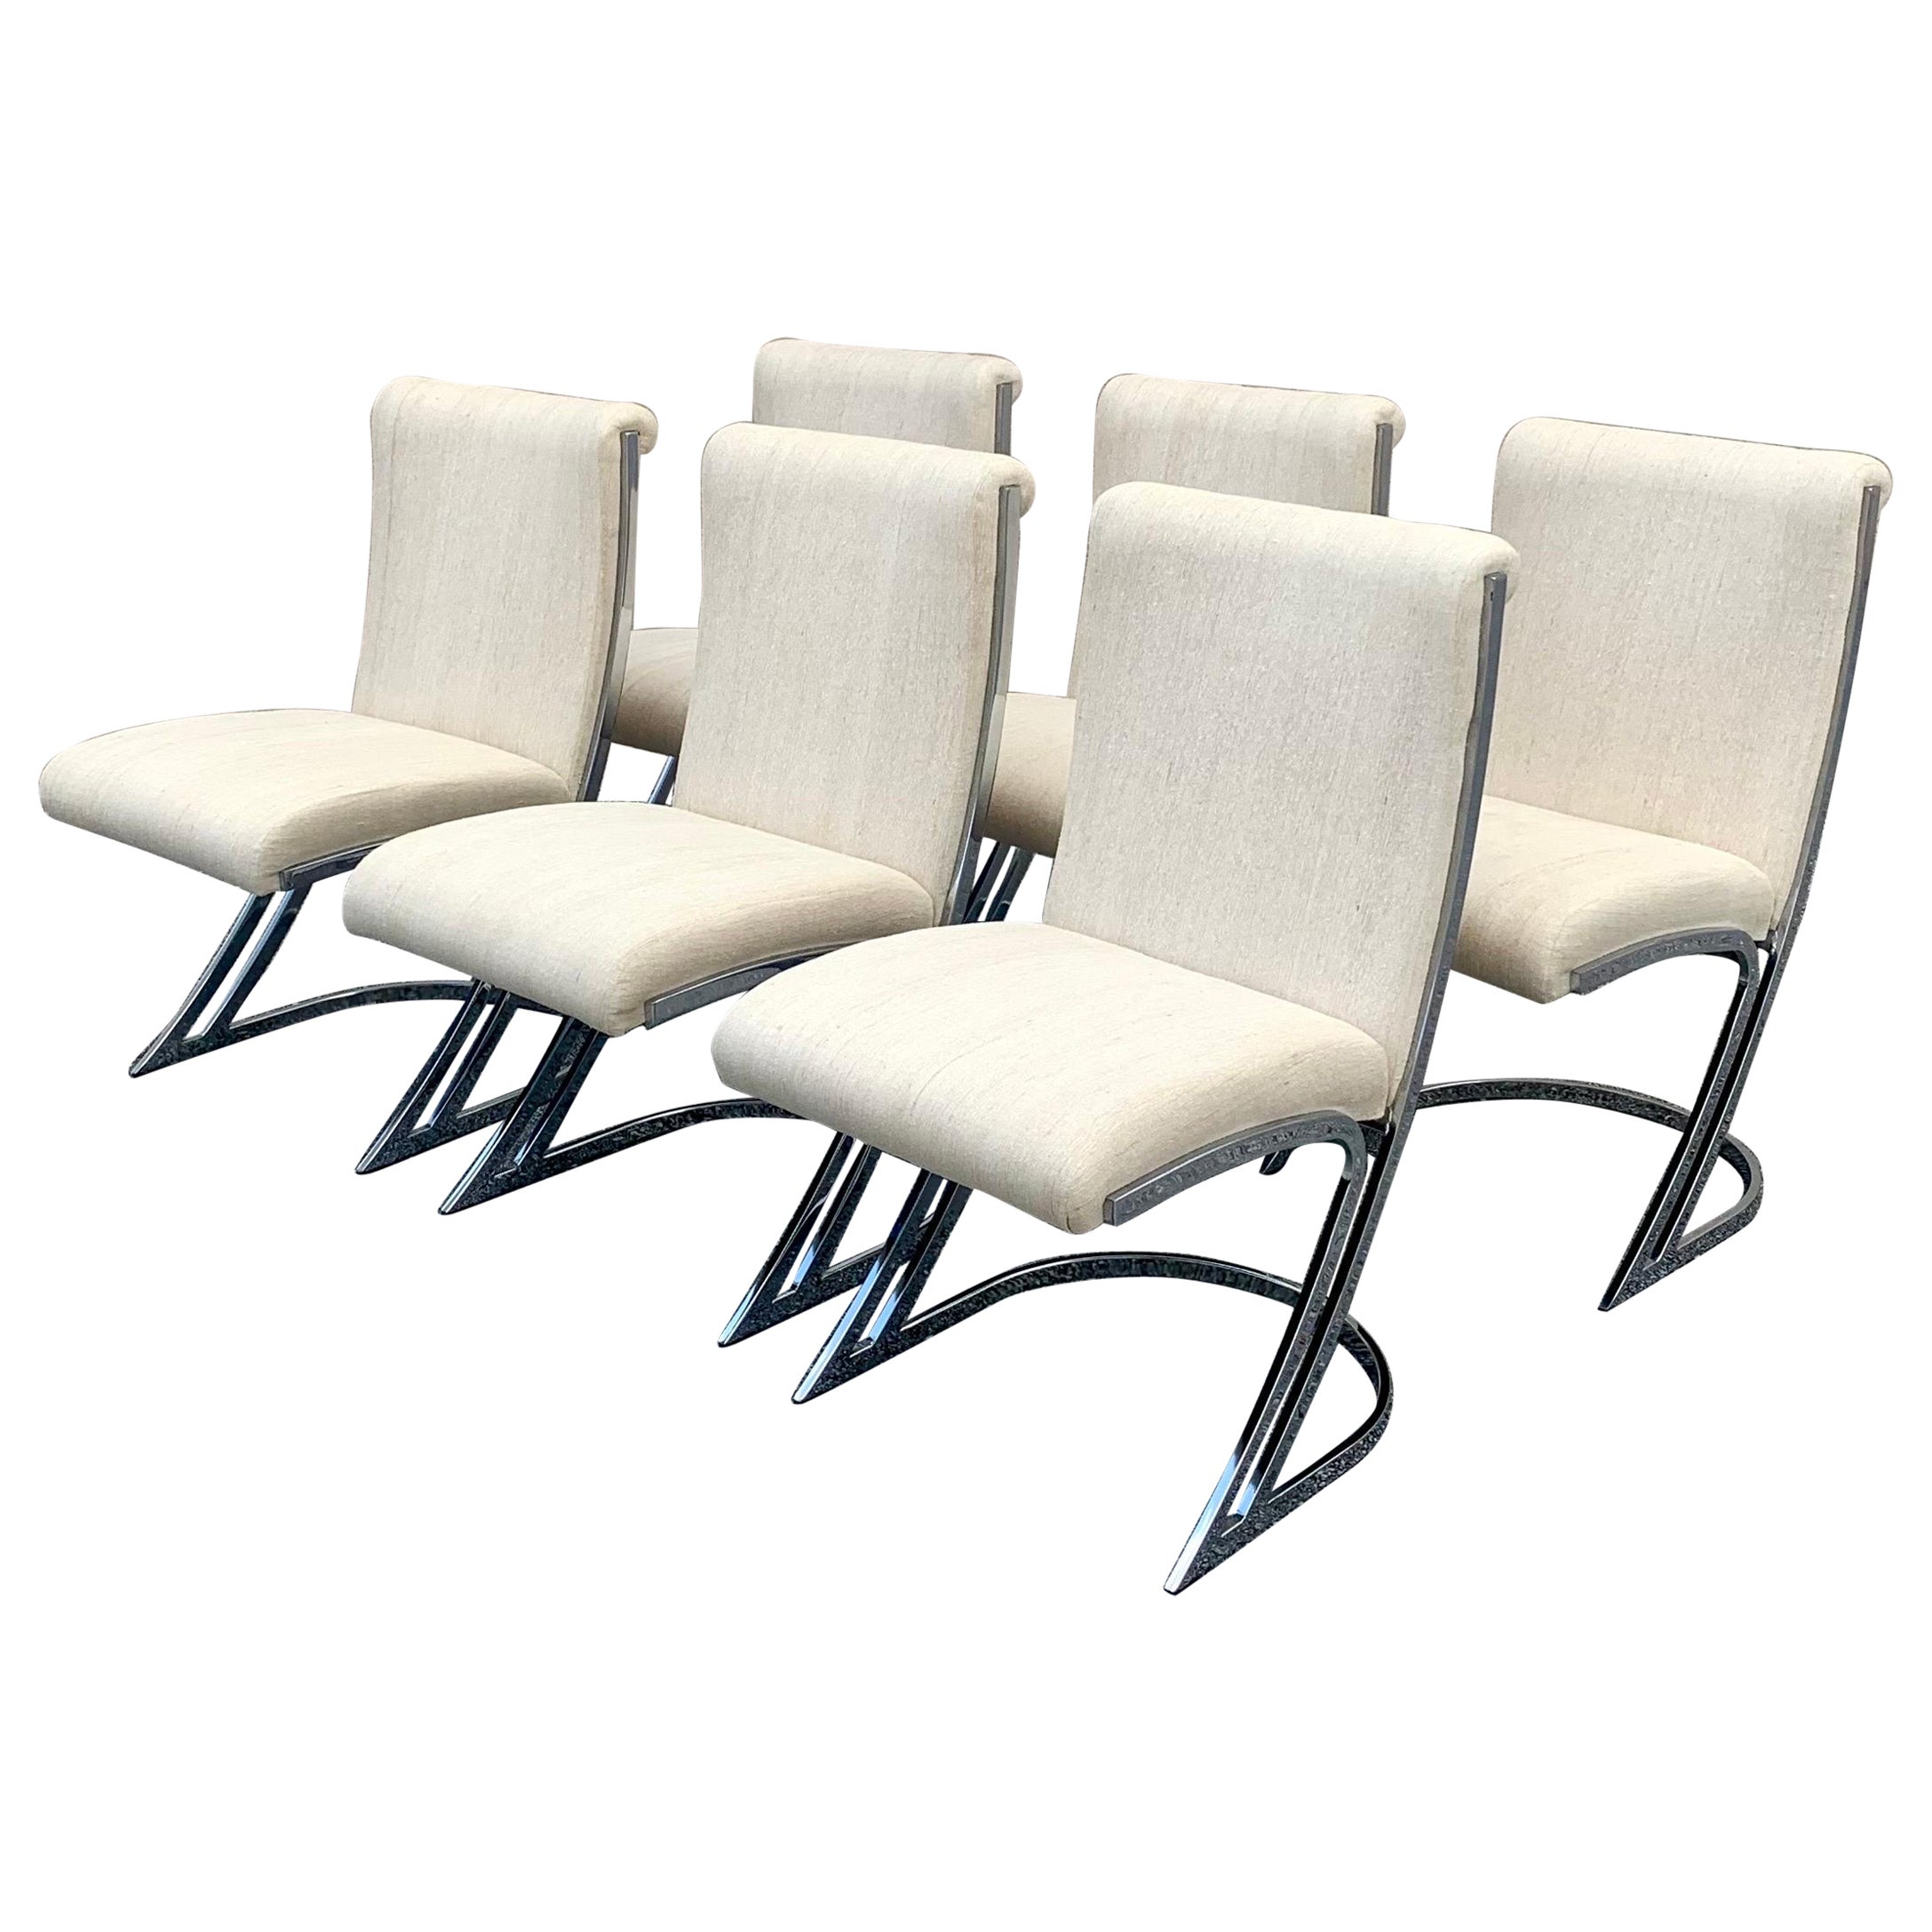 Set of Six Pierre Cardin Crome Dining Chairs, Mid-Century Modern For Sale